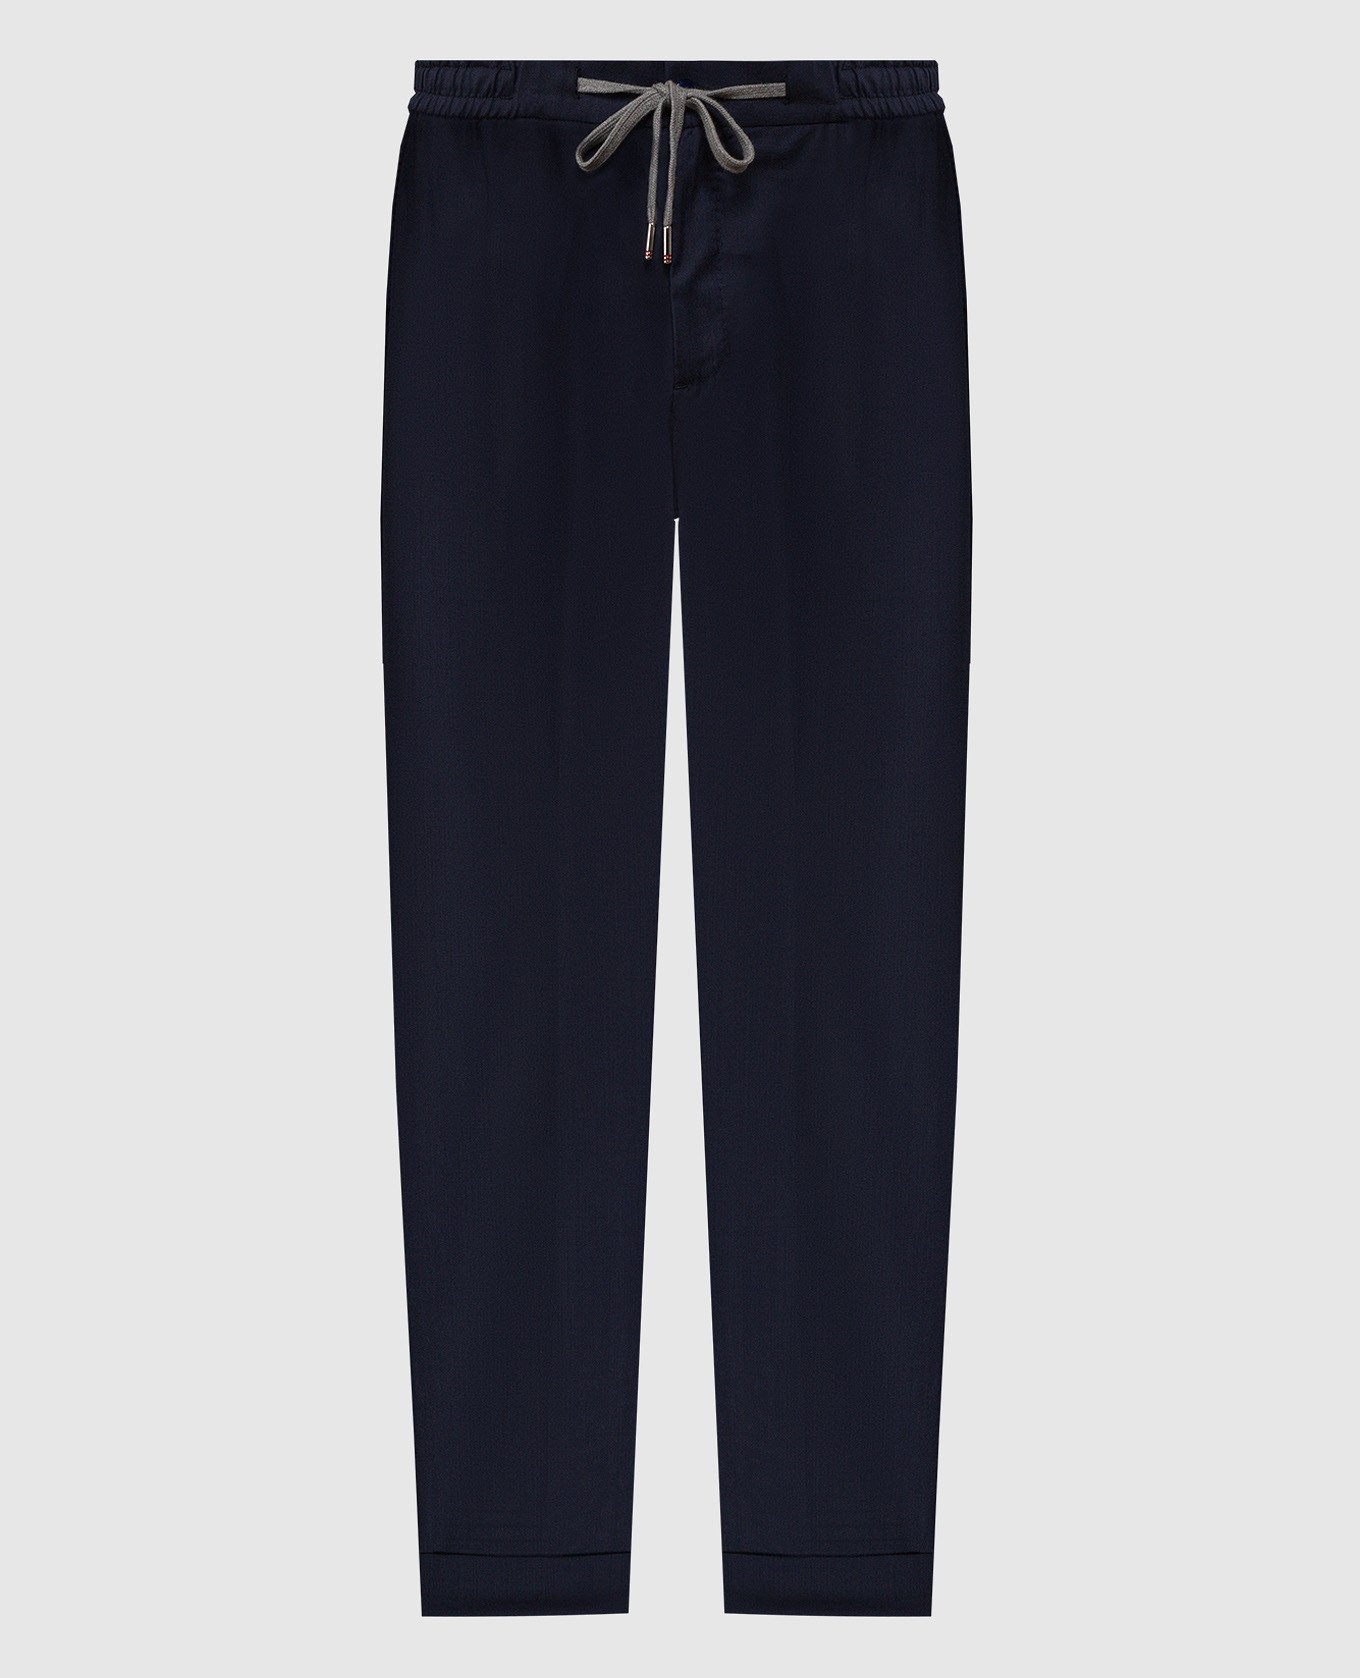 CARACCIOLO blue trousers made of wool and silk